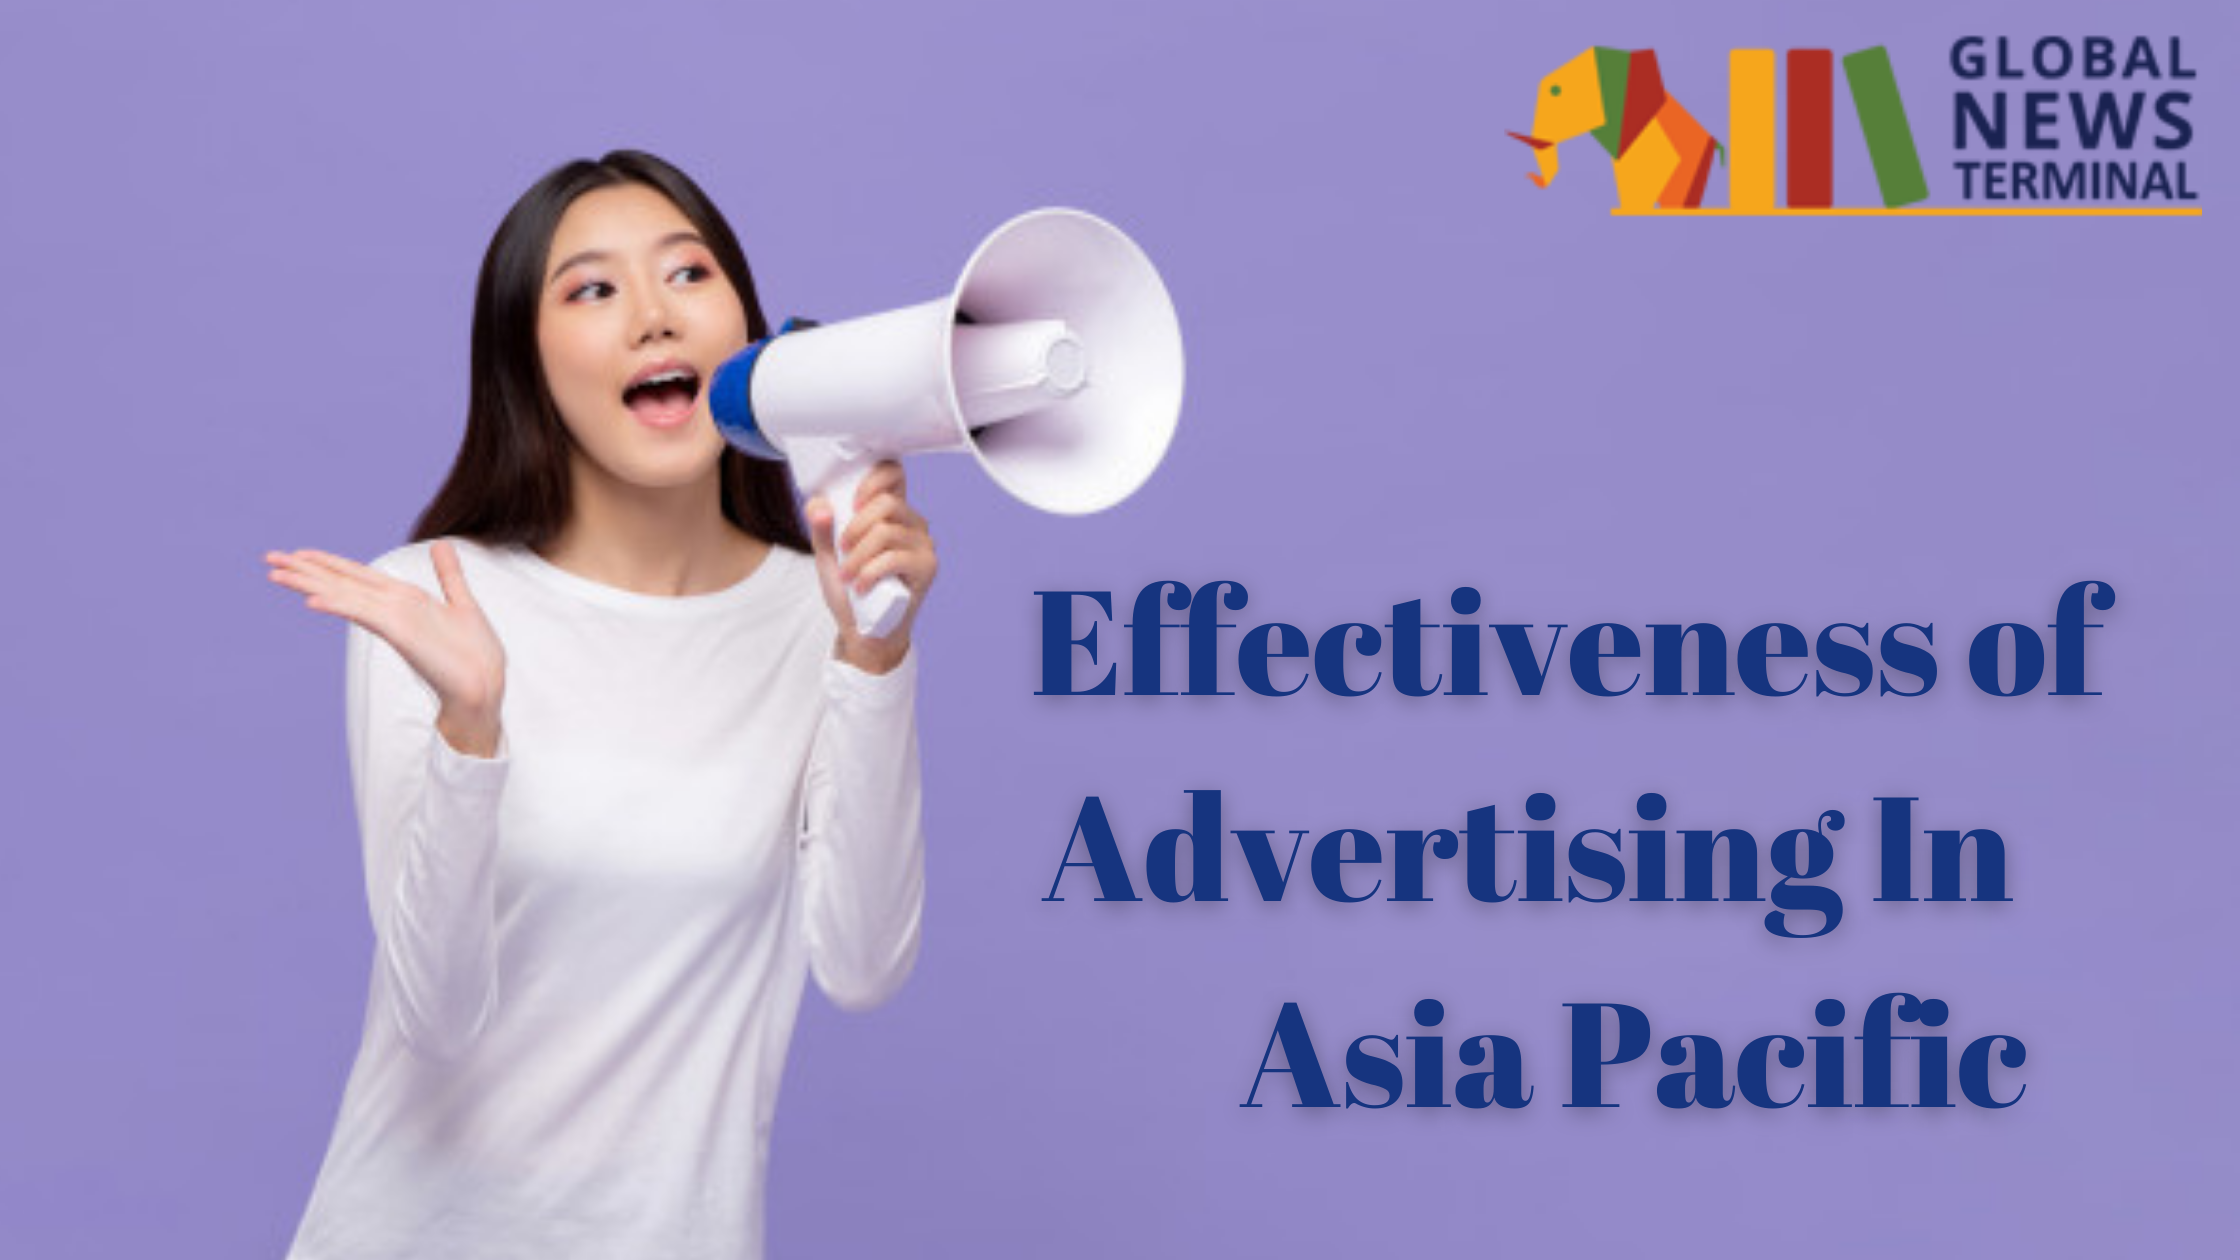 The Effectiveness of Advertising in the Asia Pacific